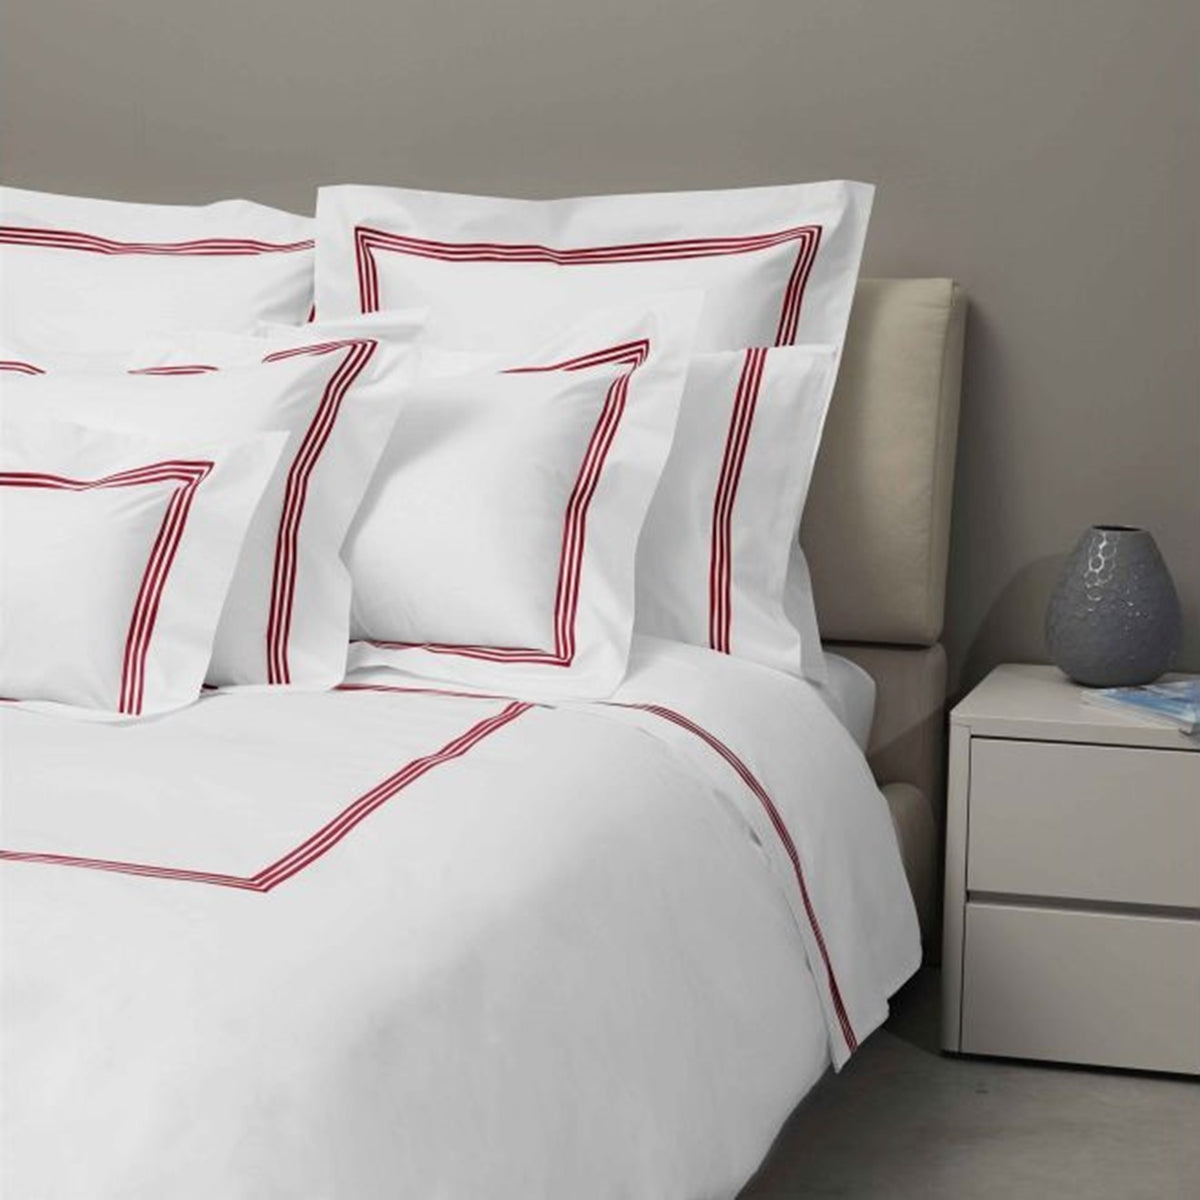 Bed Dressed in Signoria Platinum Percale Bedding in White/Cardinale Red Color